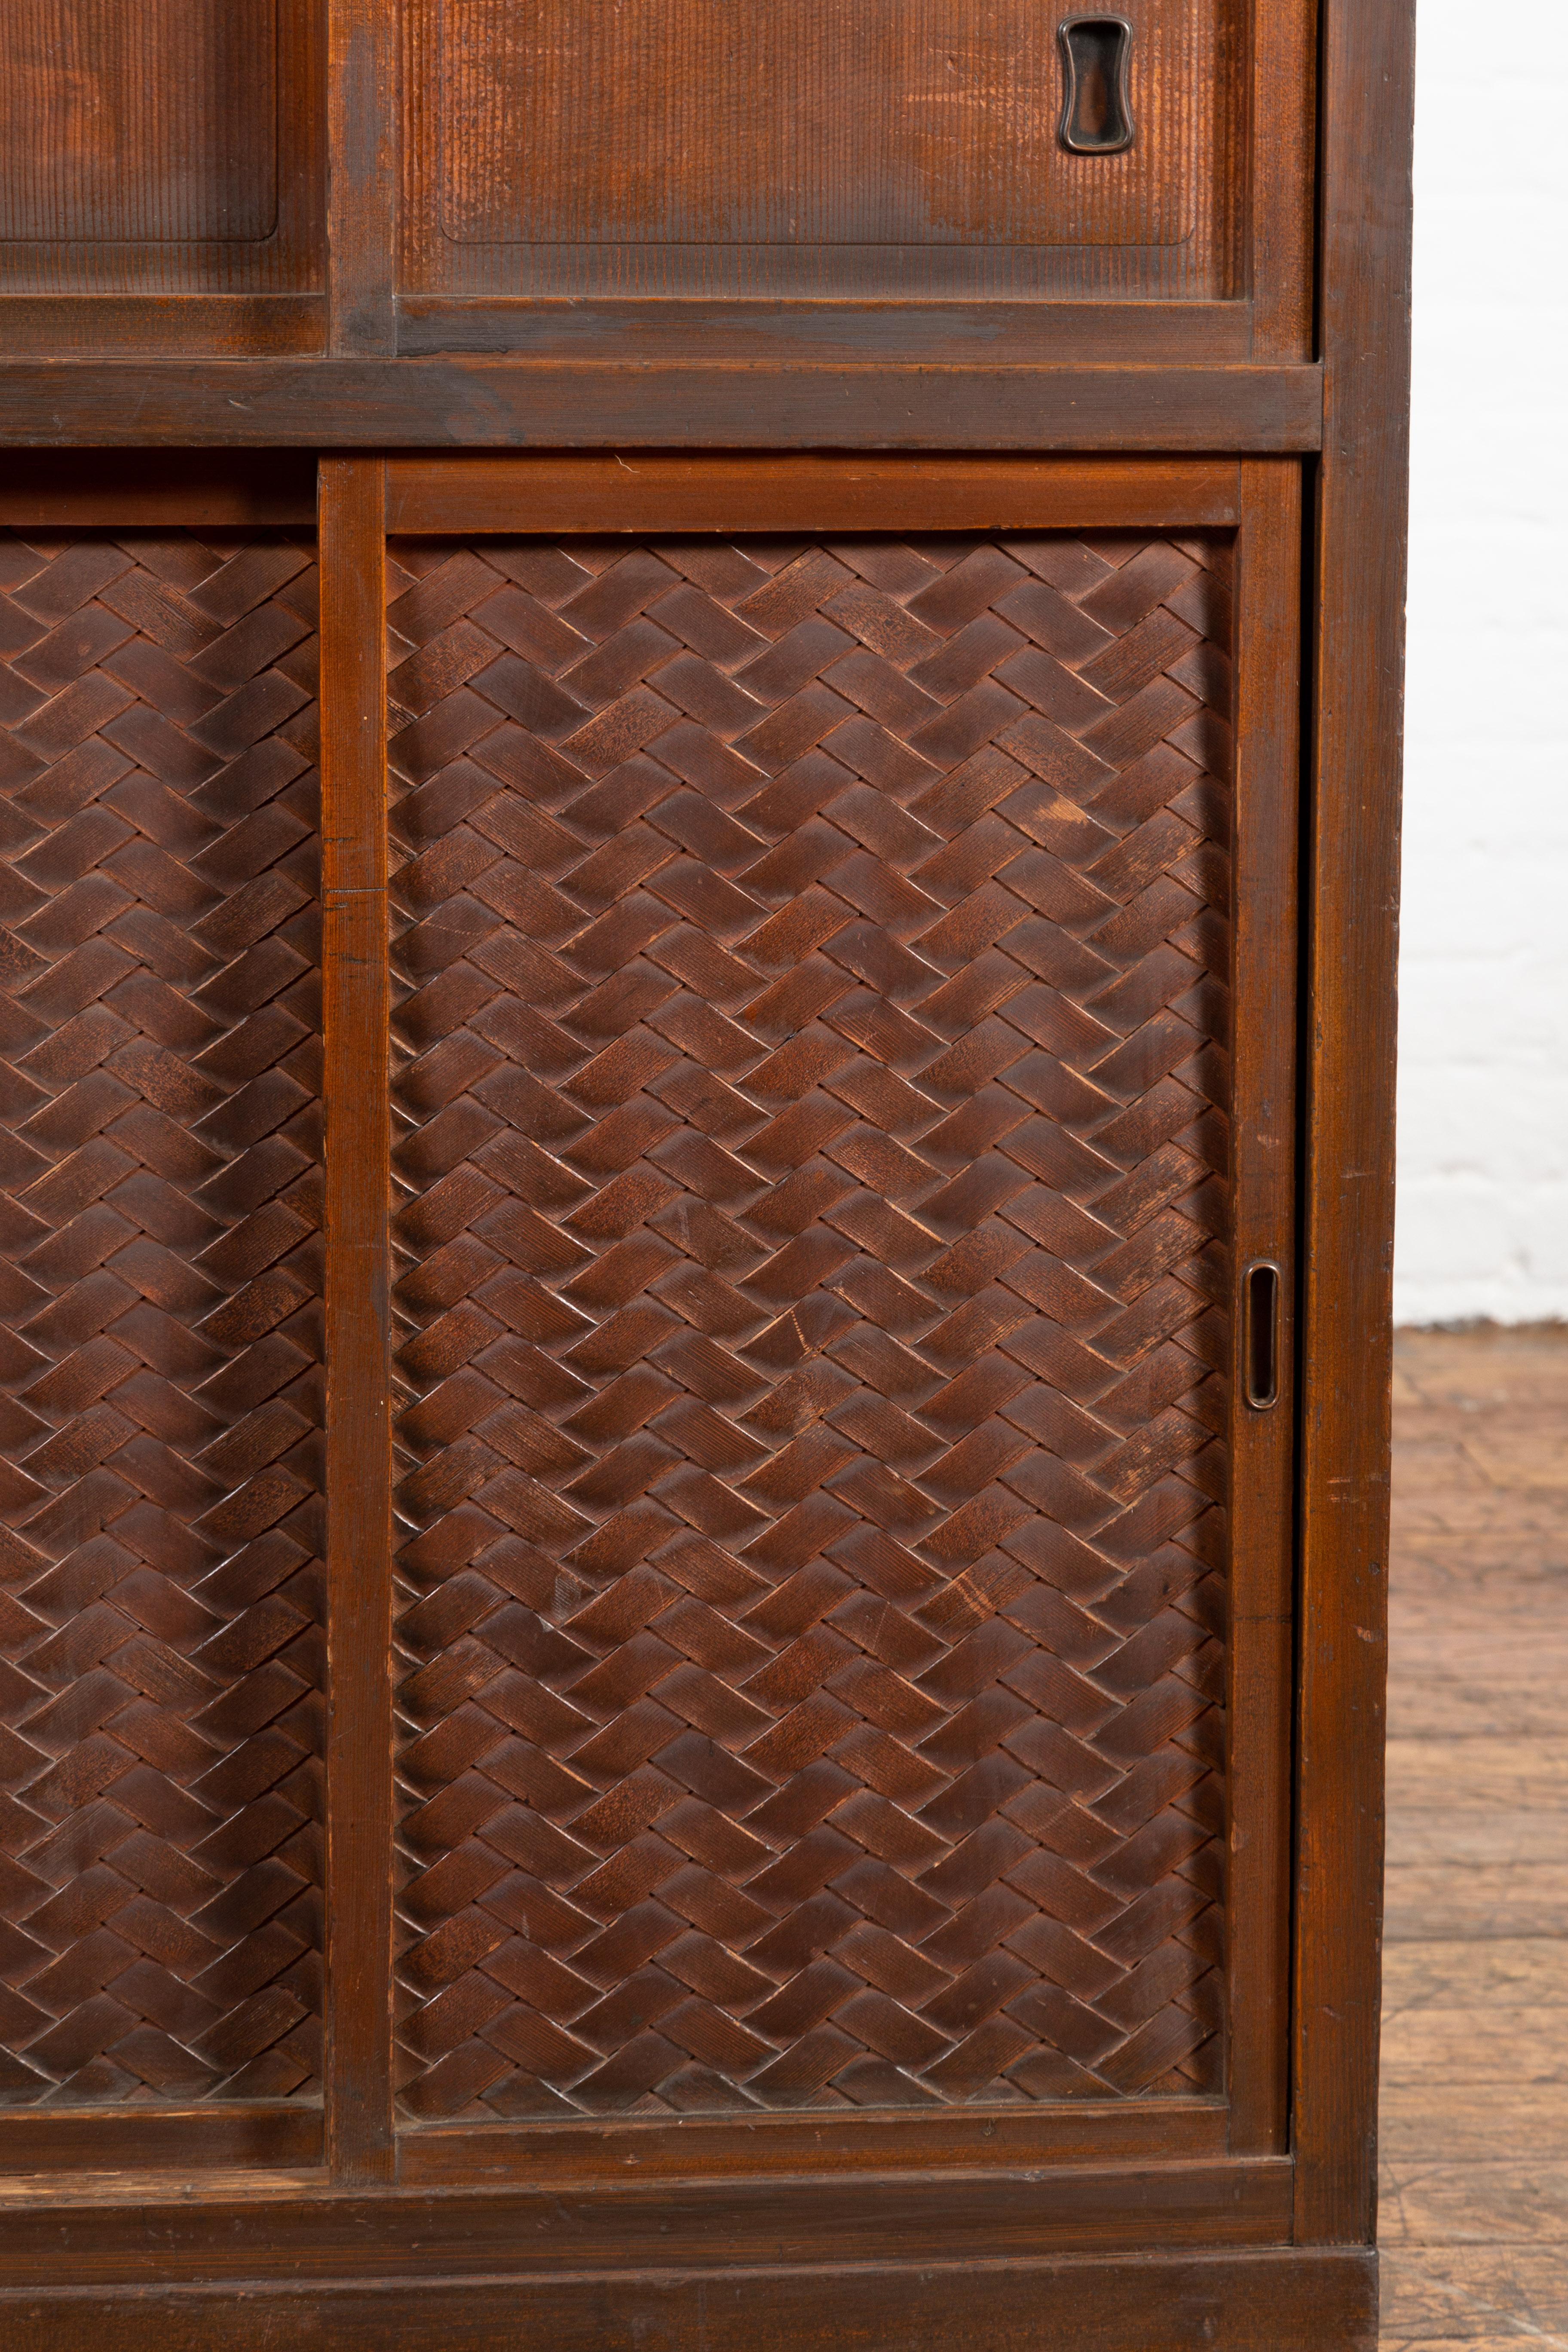 Japanese 19th Century Cabinet with Sliding Doors and Woven Criss-Cross Design For Sale 2